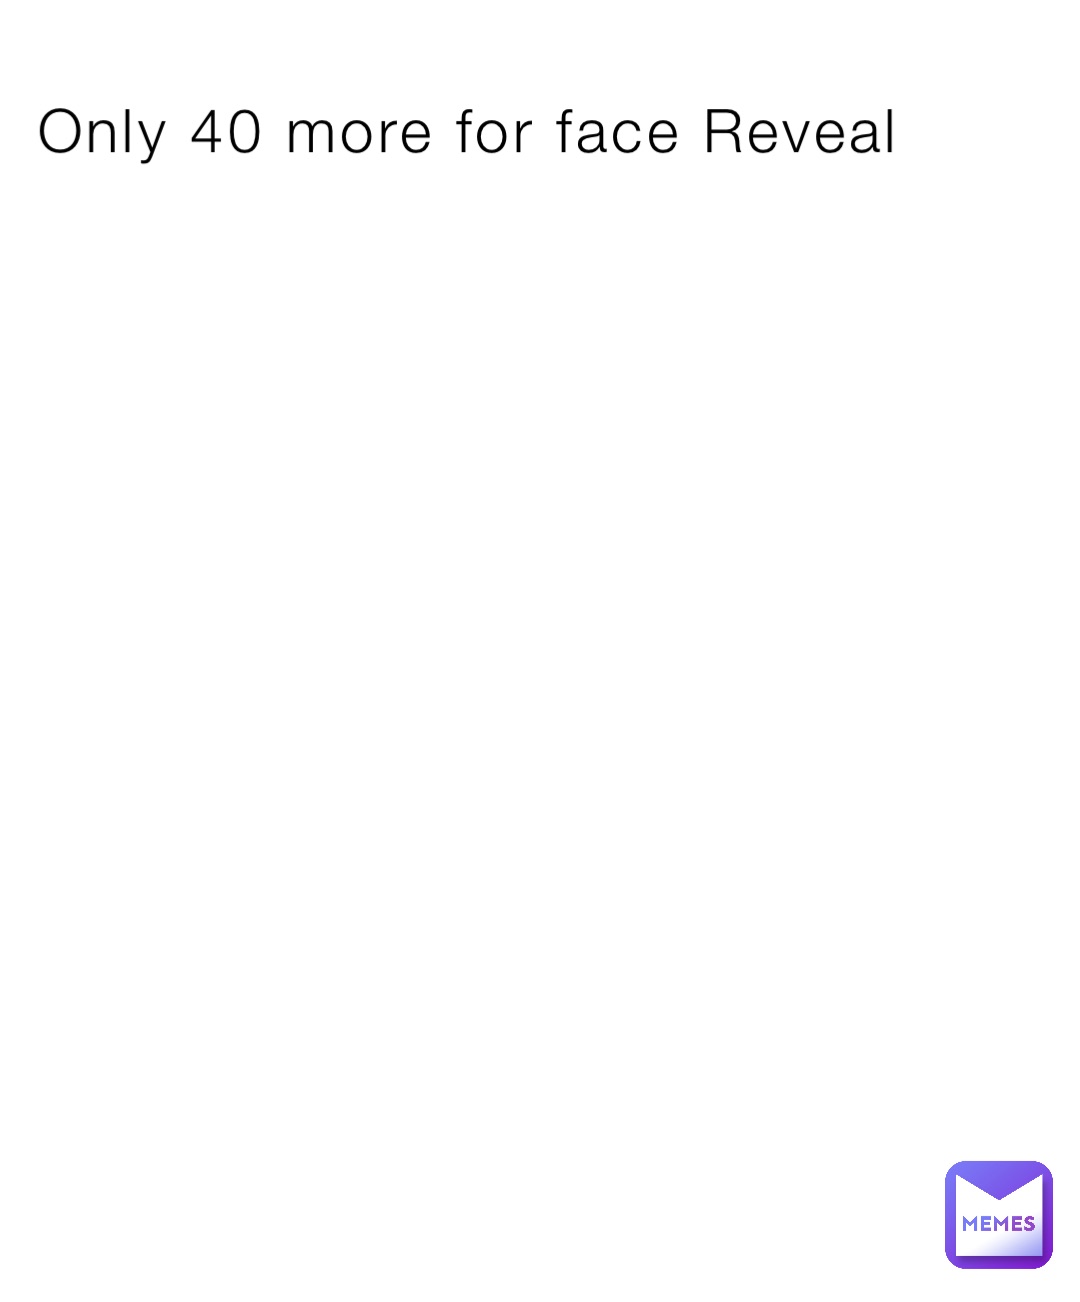 Only 40 more for face Reveal